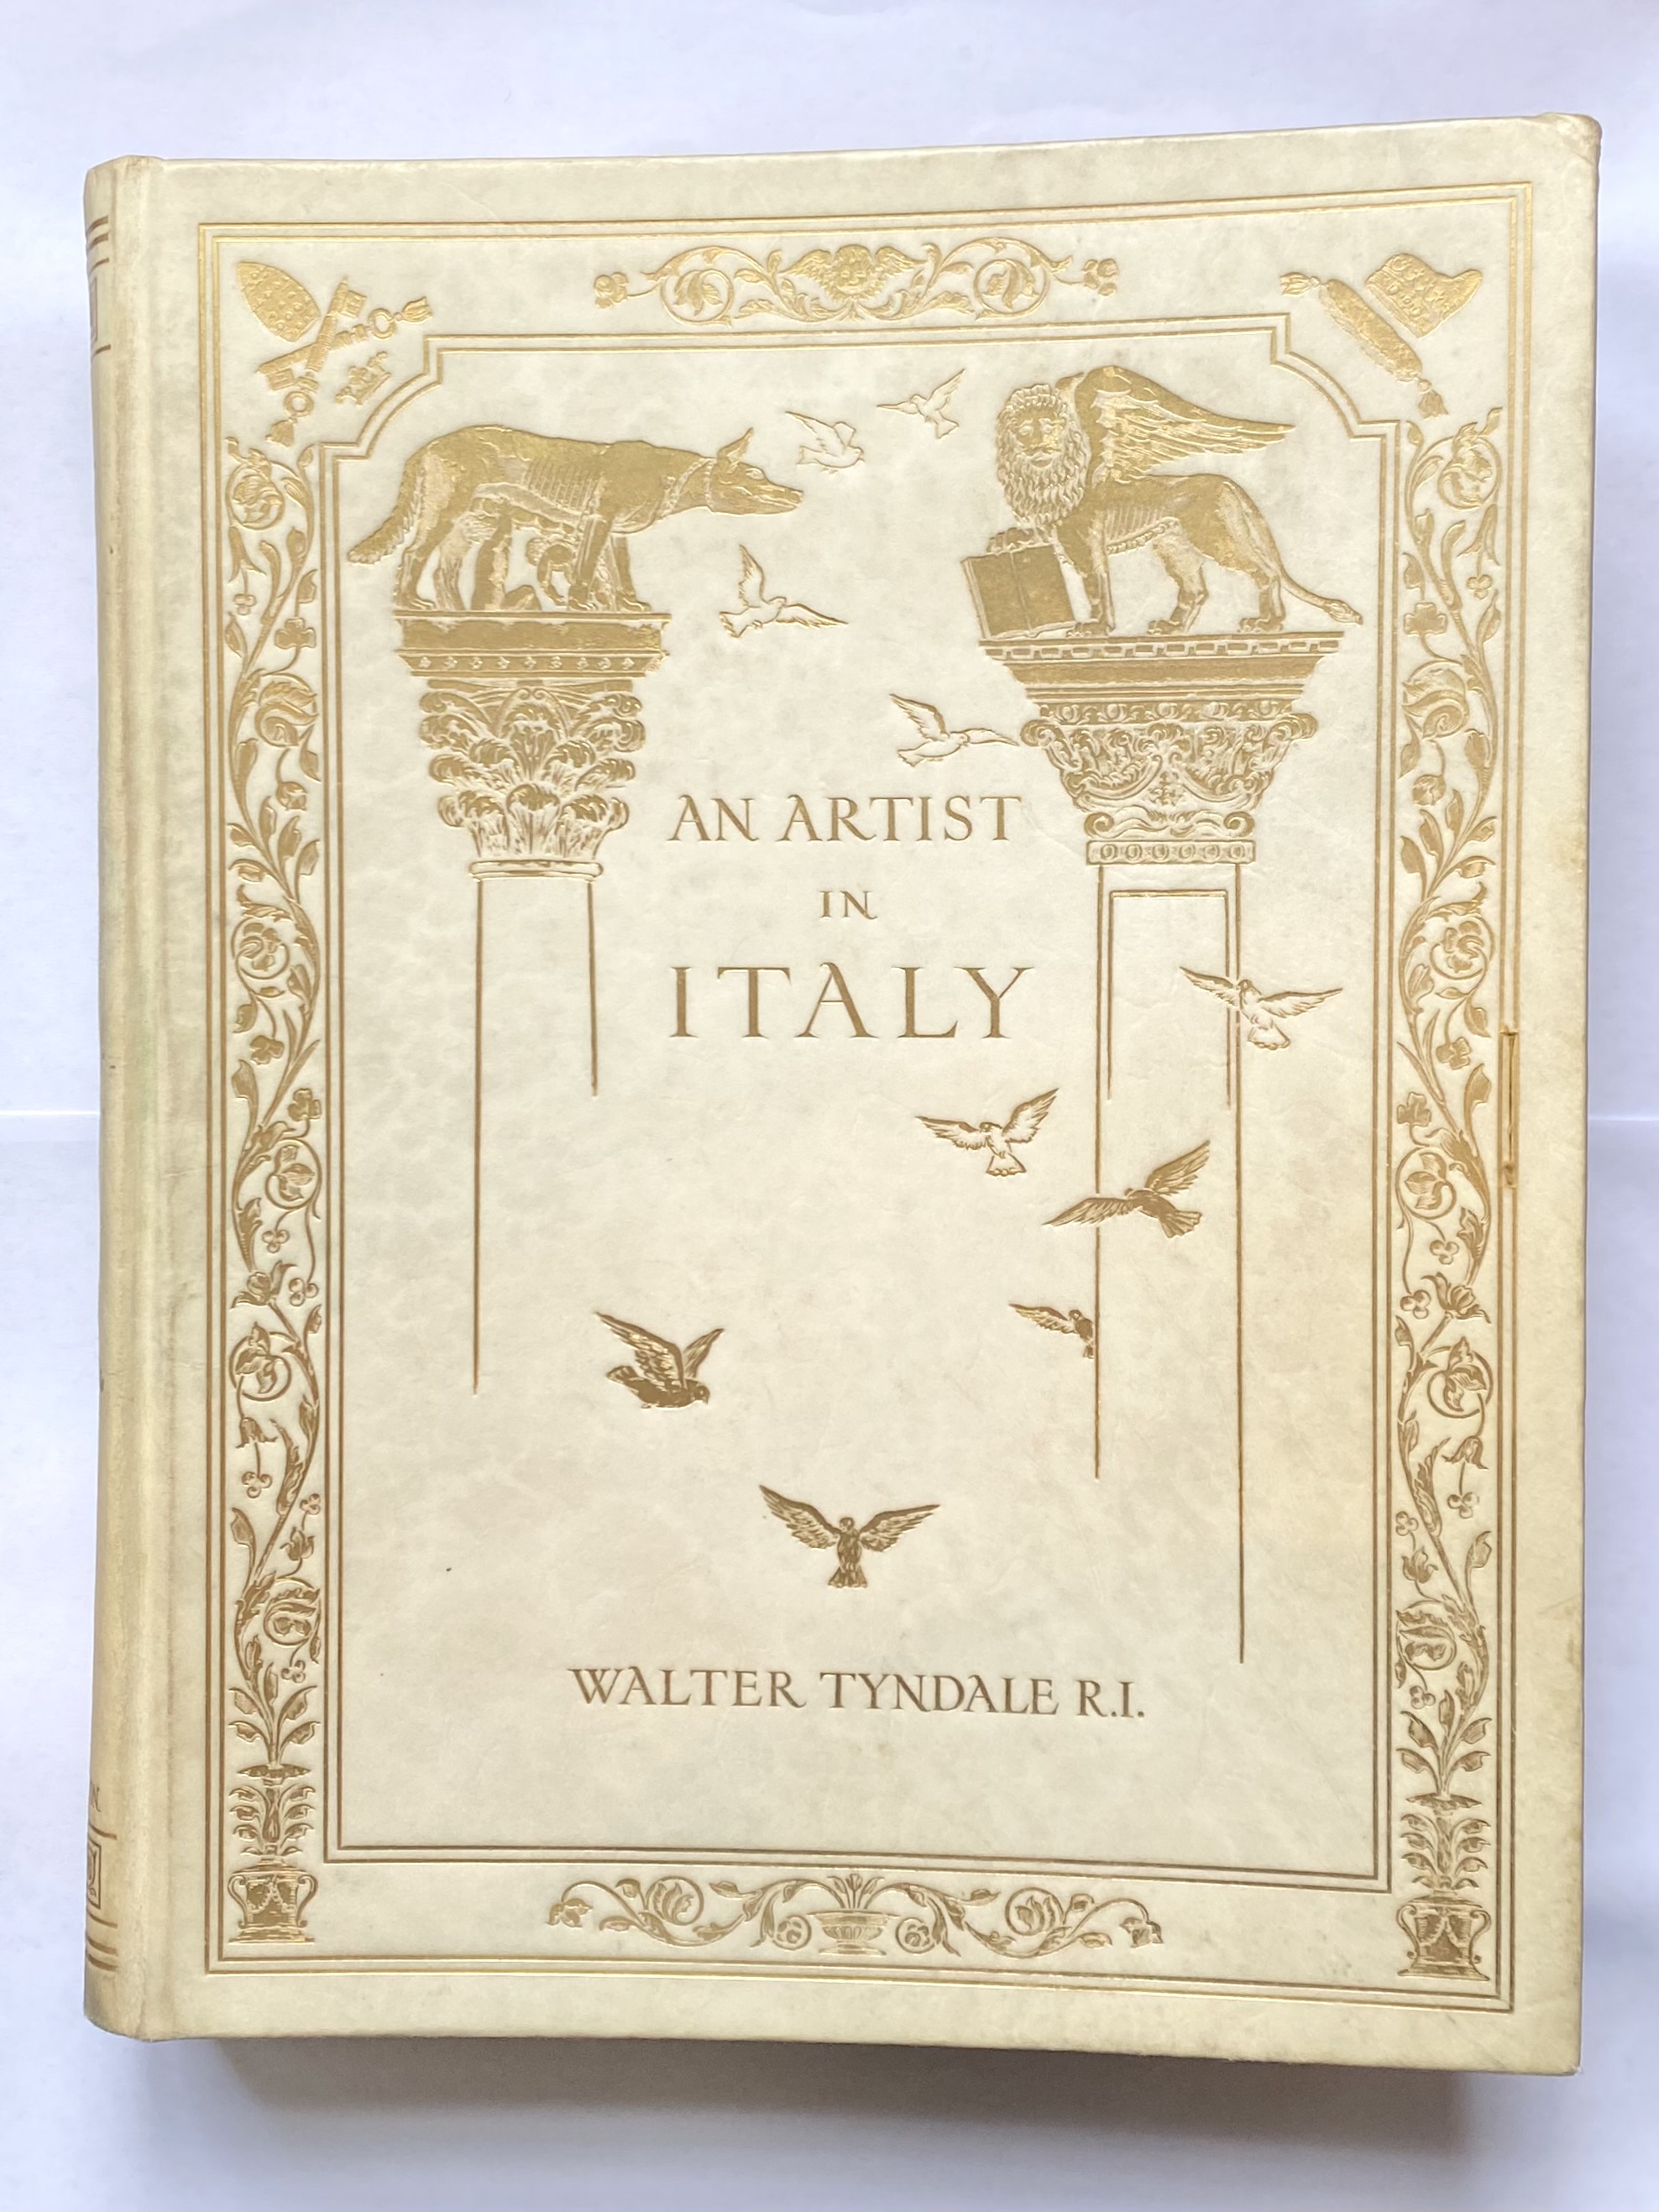 An Artist in Italy - Written and Painted by Walter Tyndale, R.I.